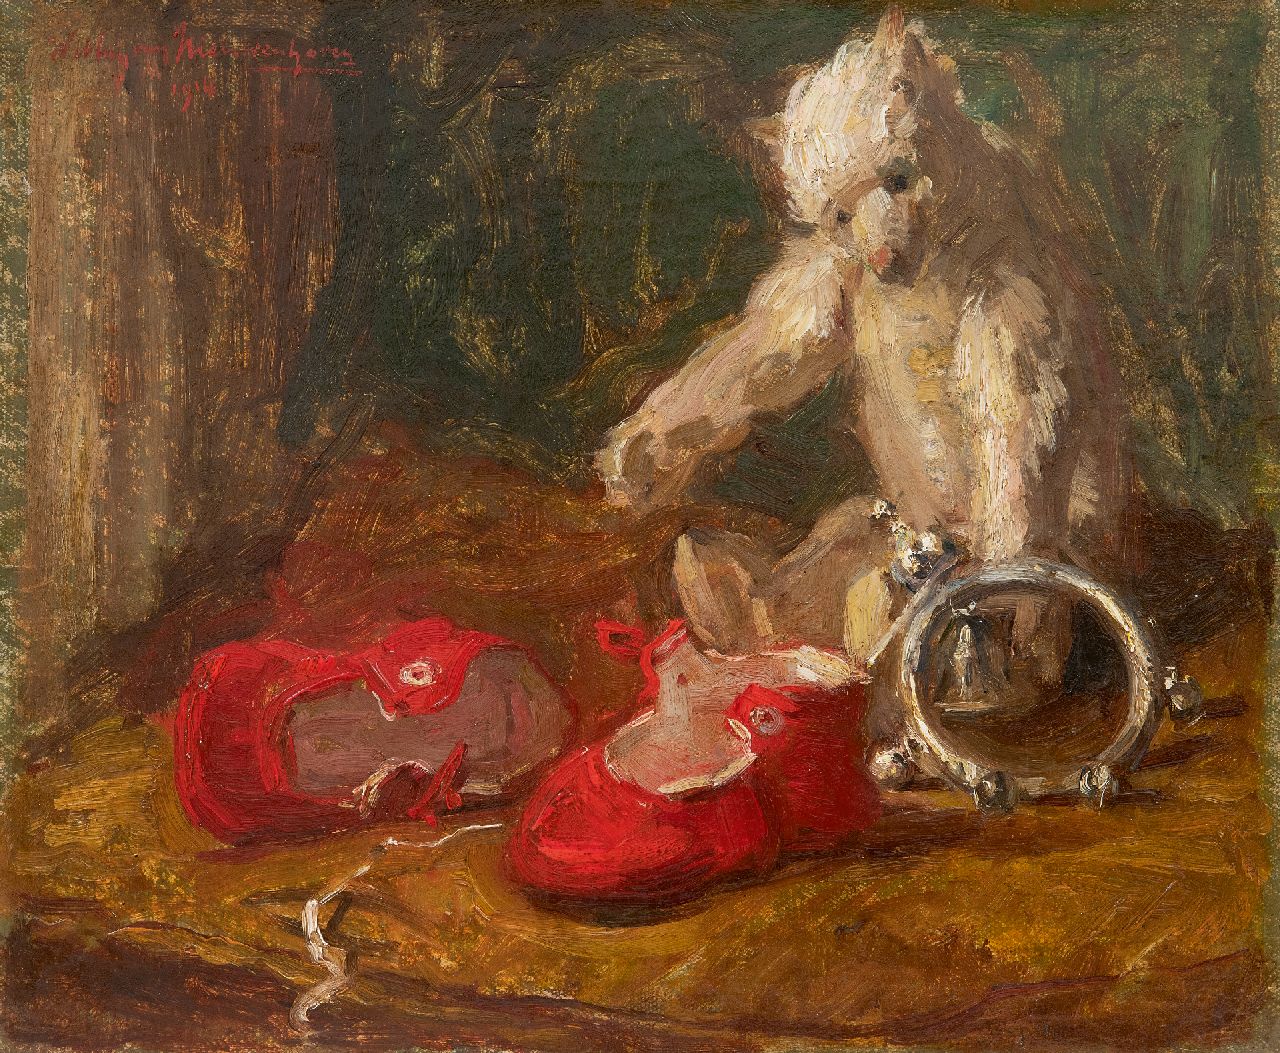 Willem van Nieuwenhoven | Still life with bear and red children's shoes, oil on canvas, 30.0 x 35.9 cm, signed u.l. and dated 1914